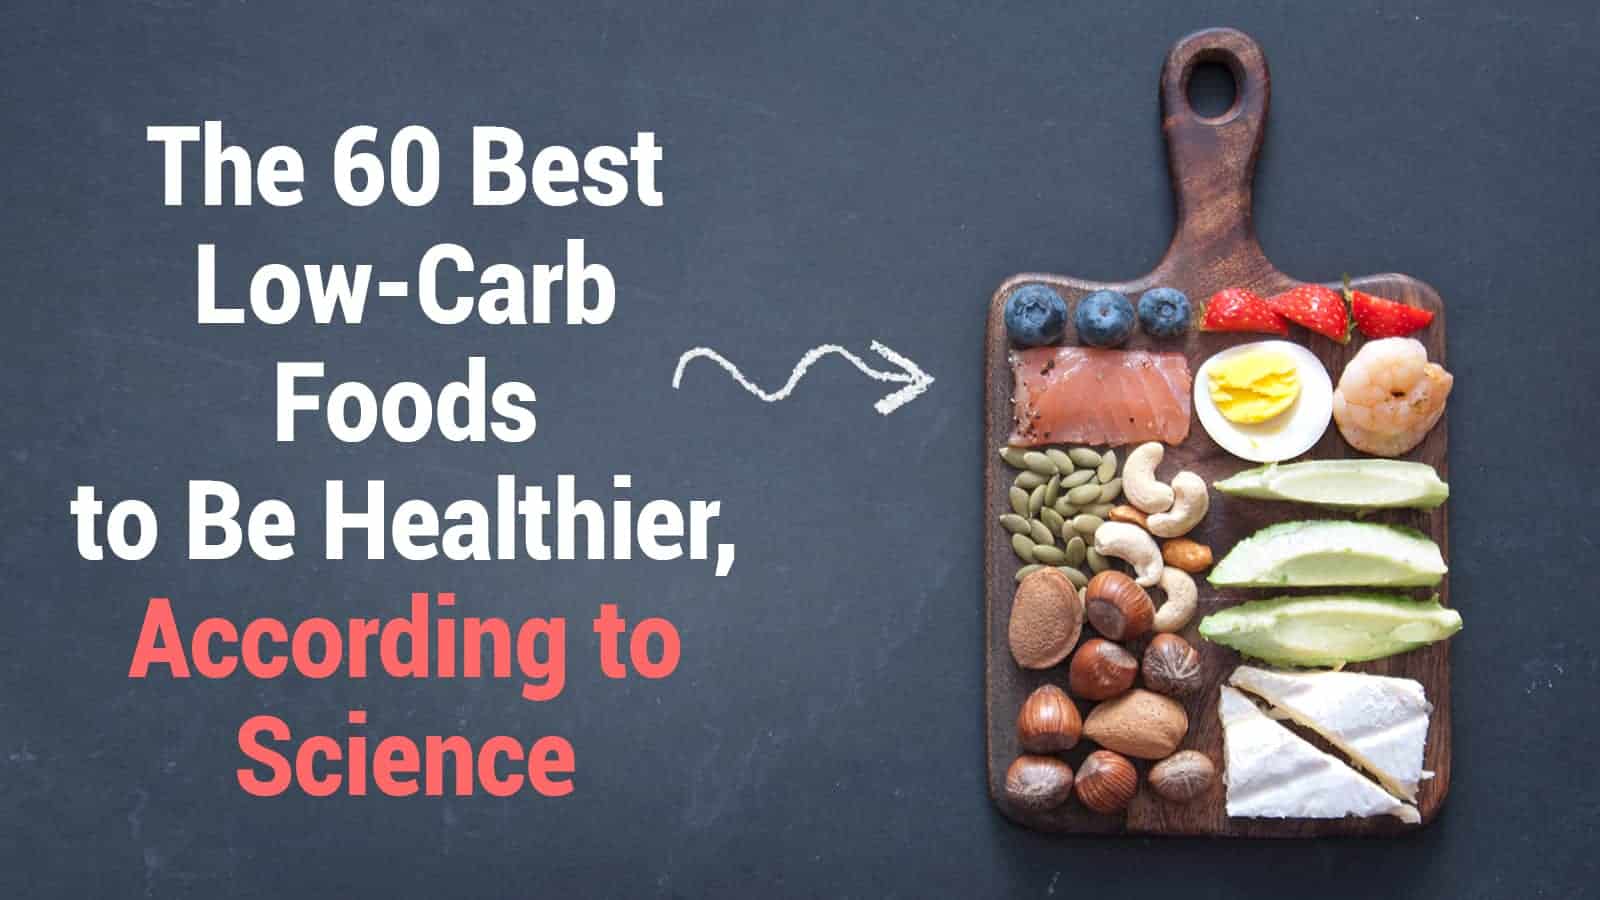 The 60 Best Low-Carb Foods to Be Healthier, According to Science